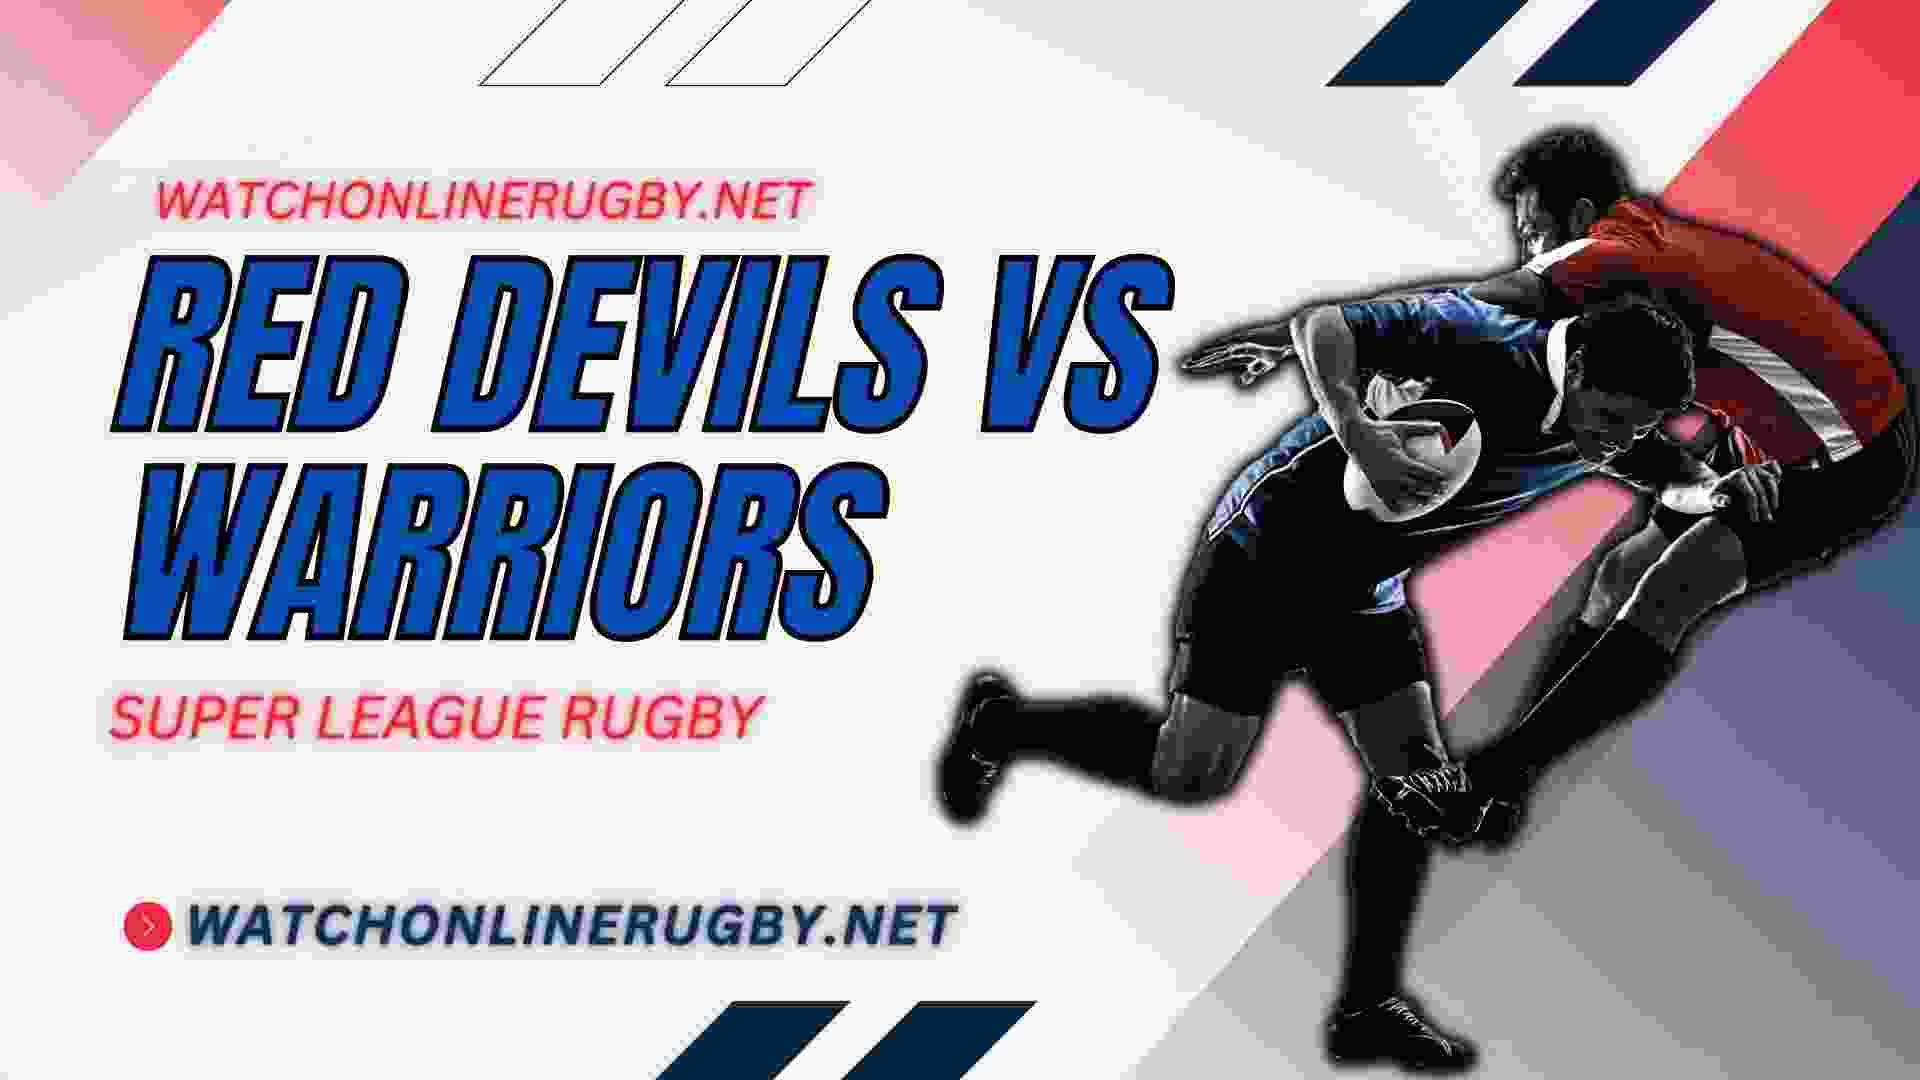 warriors game today live stream free